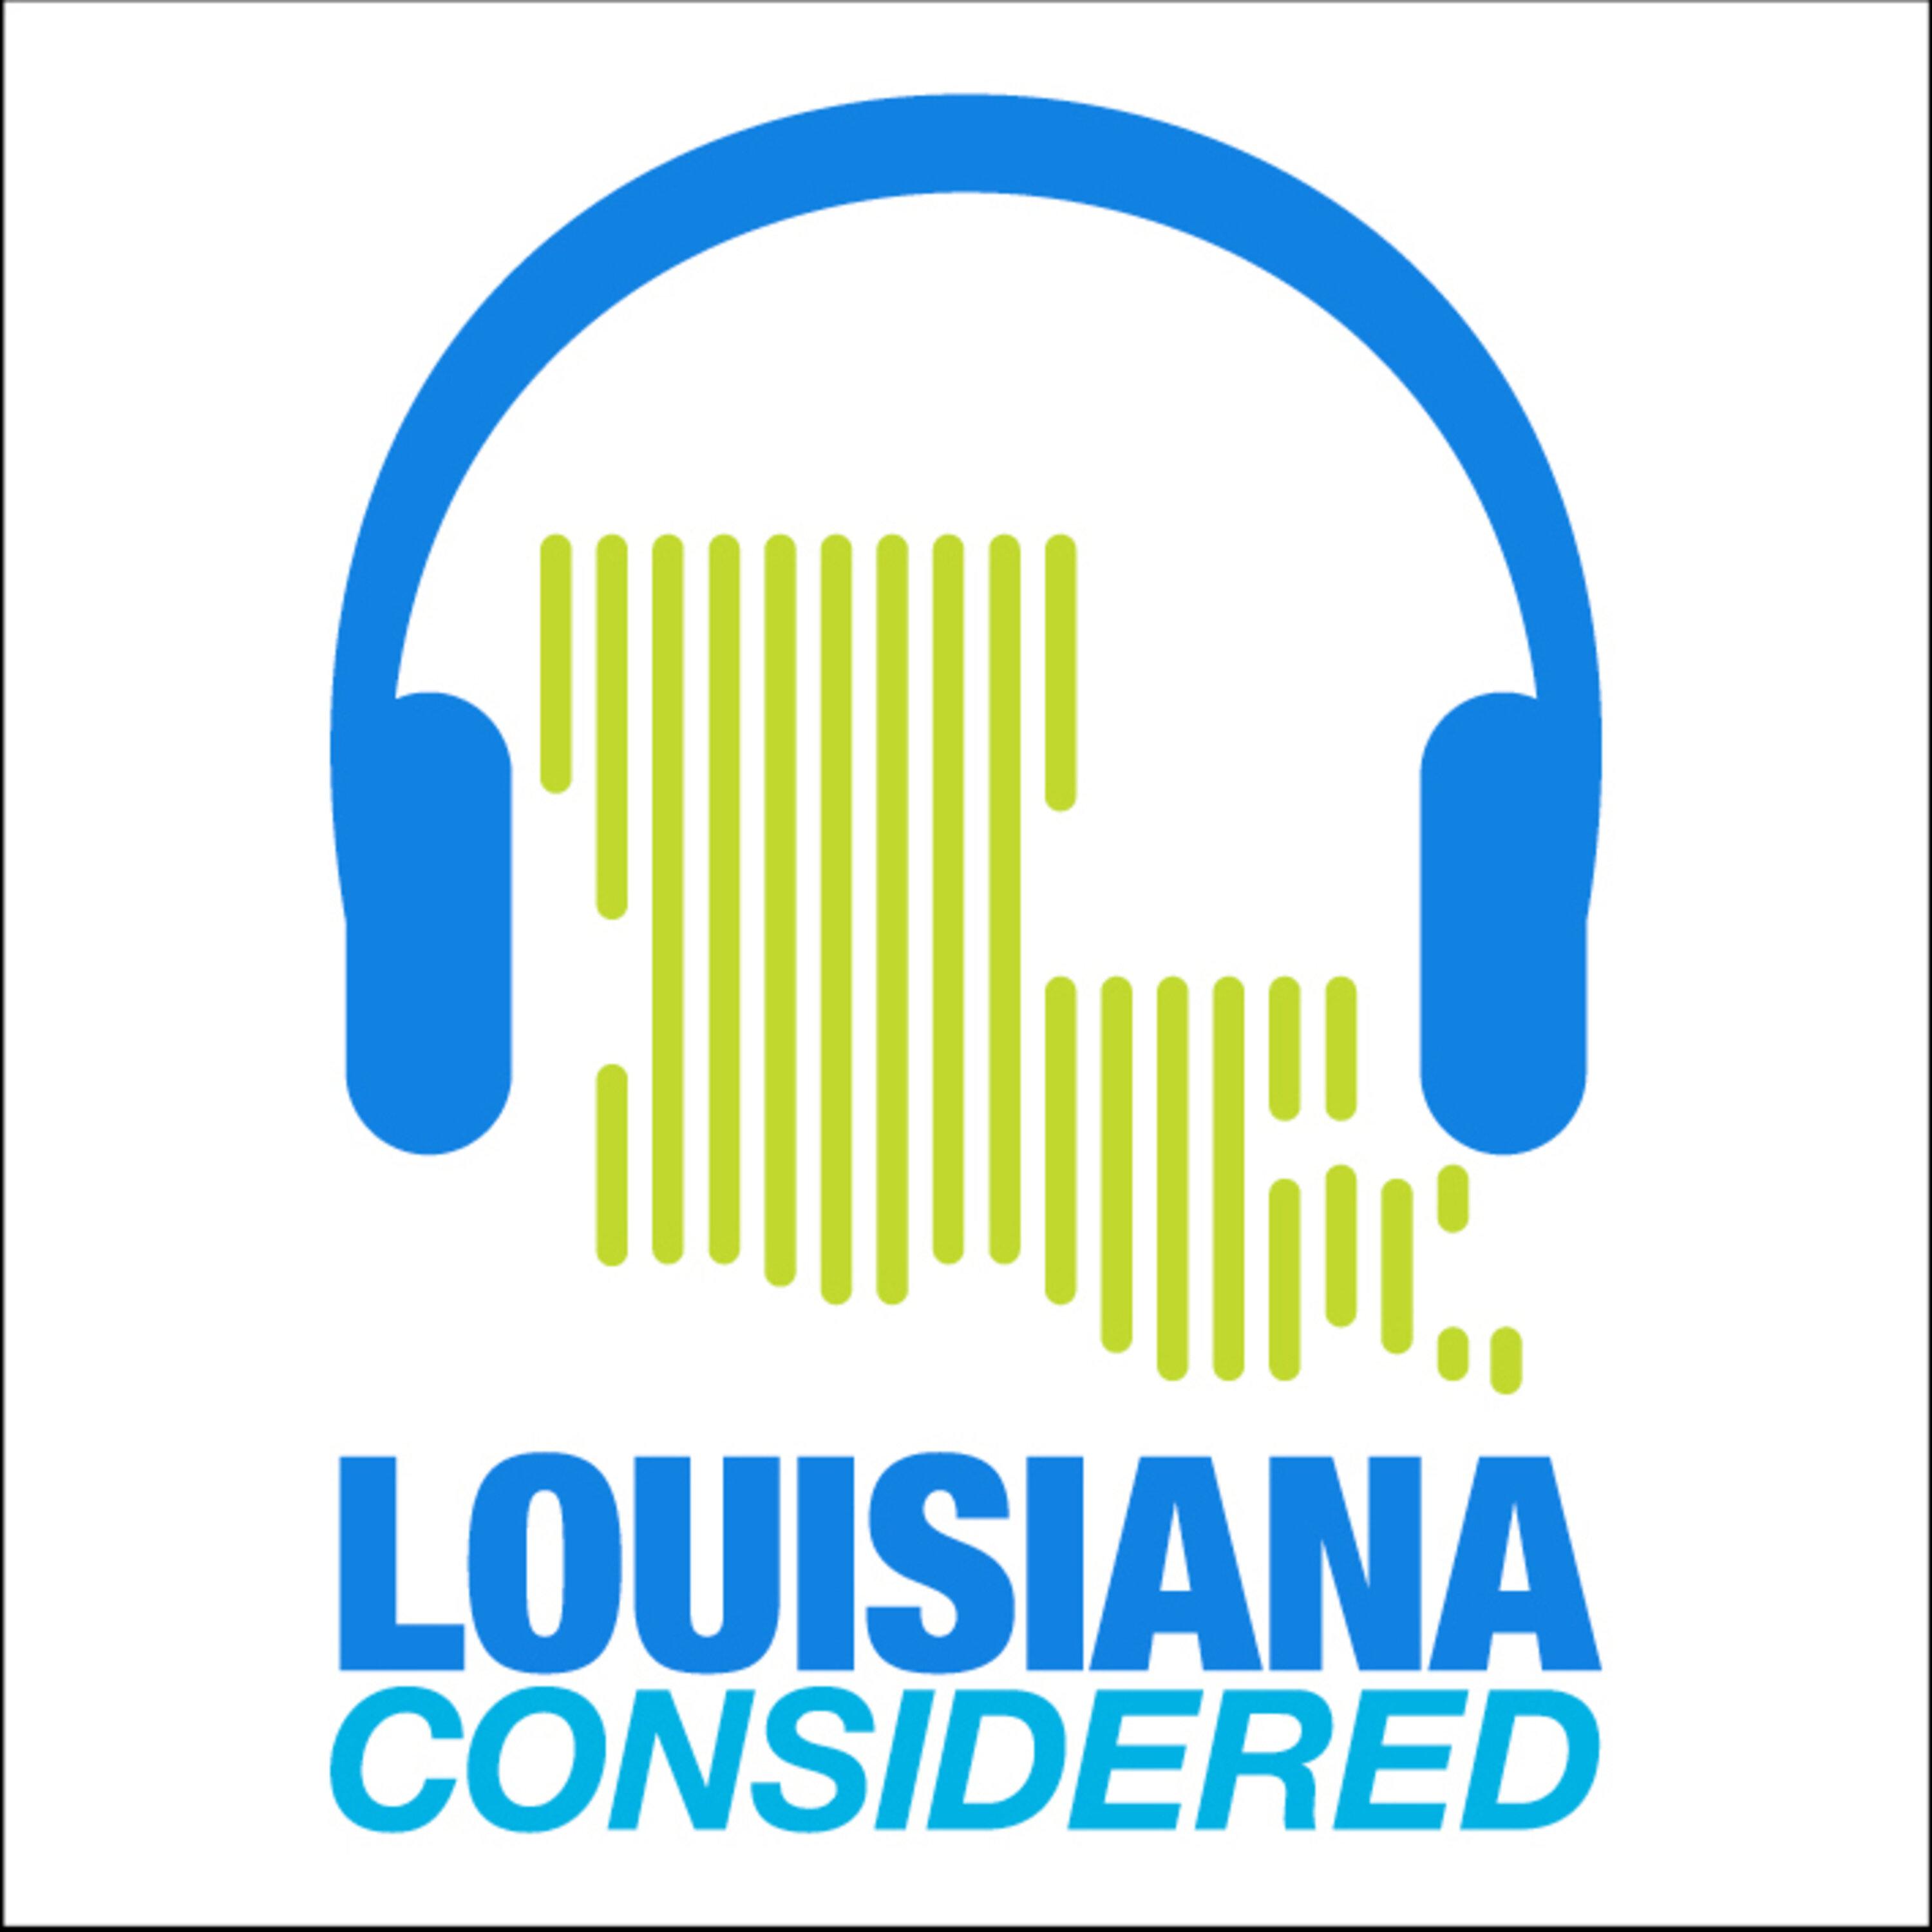 Thumbnail for "Louisiana Considered: Veto Override Session May Pass Anti-Vaccine Bills, Atchafalaya National Heritage Area Grantees".